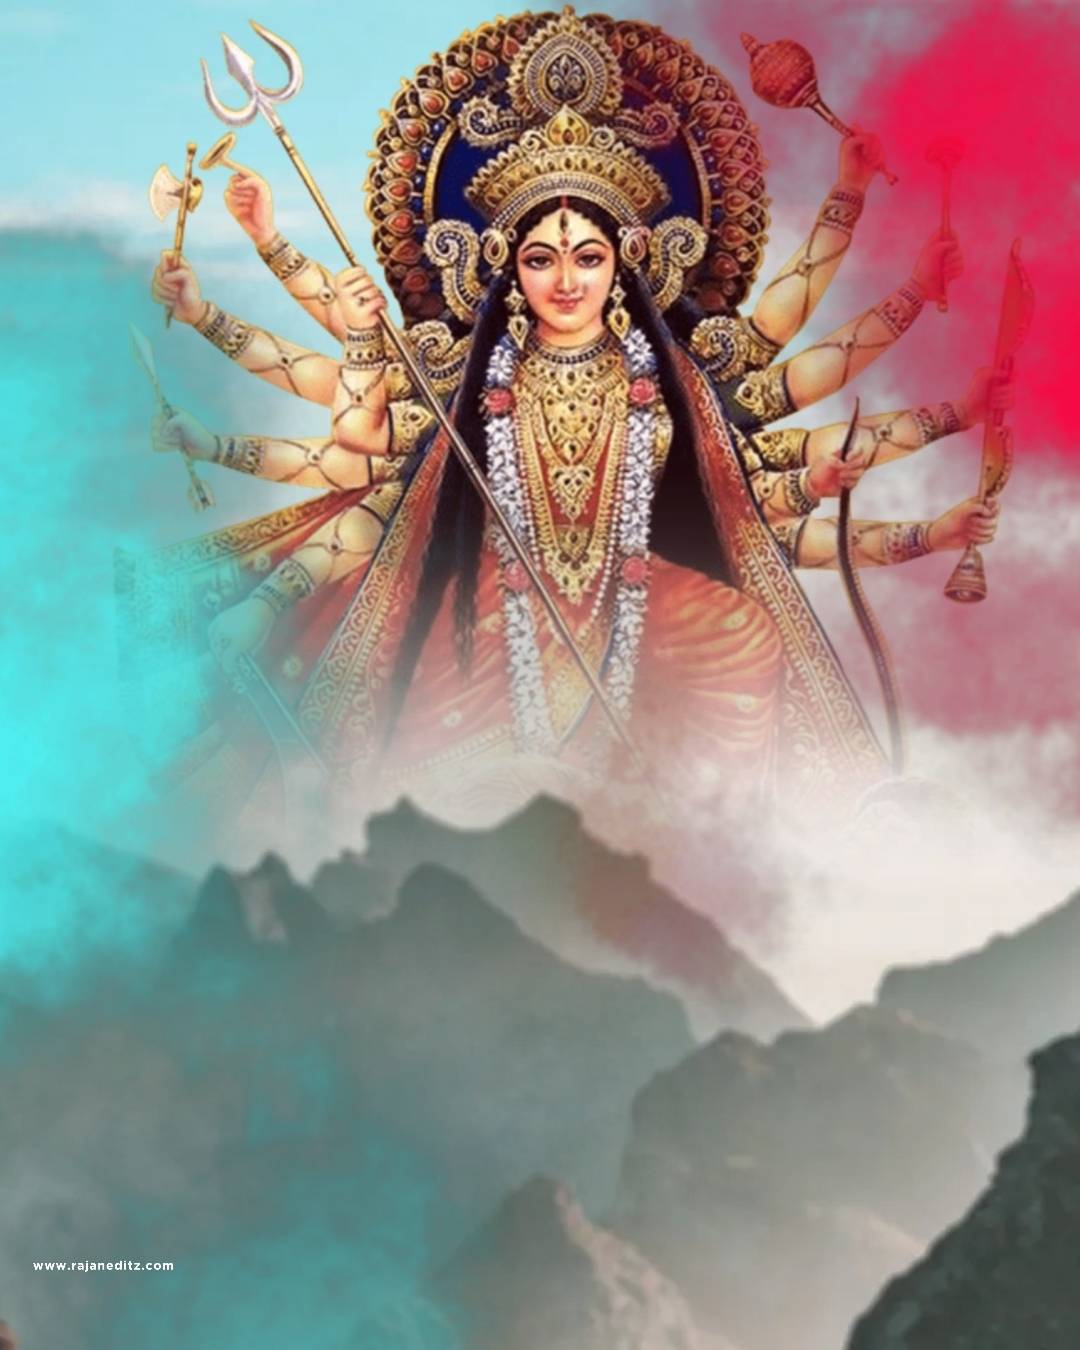 Youtube durgapuja editing background download free__Durga Puja editing background